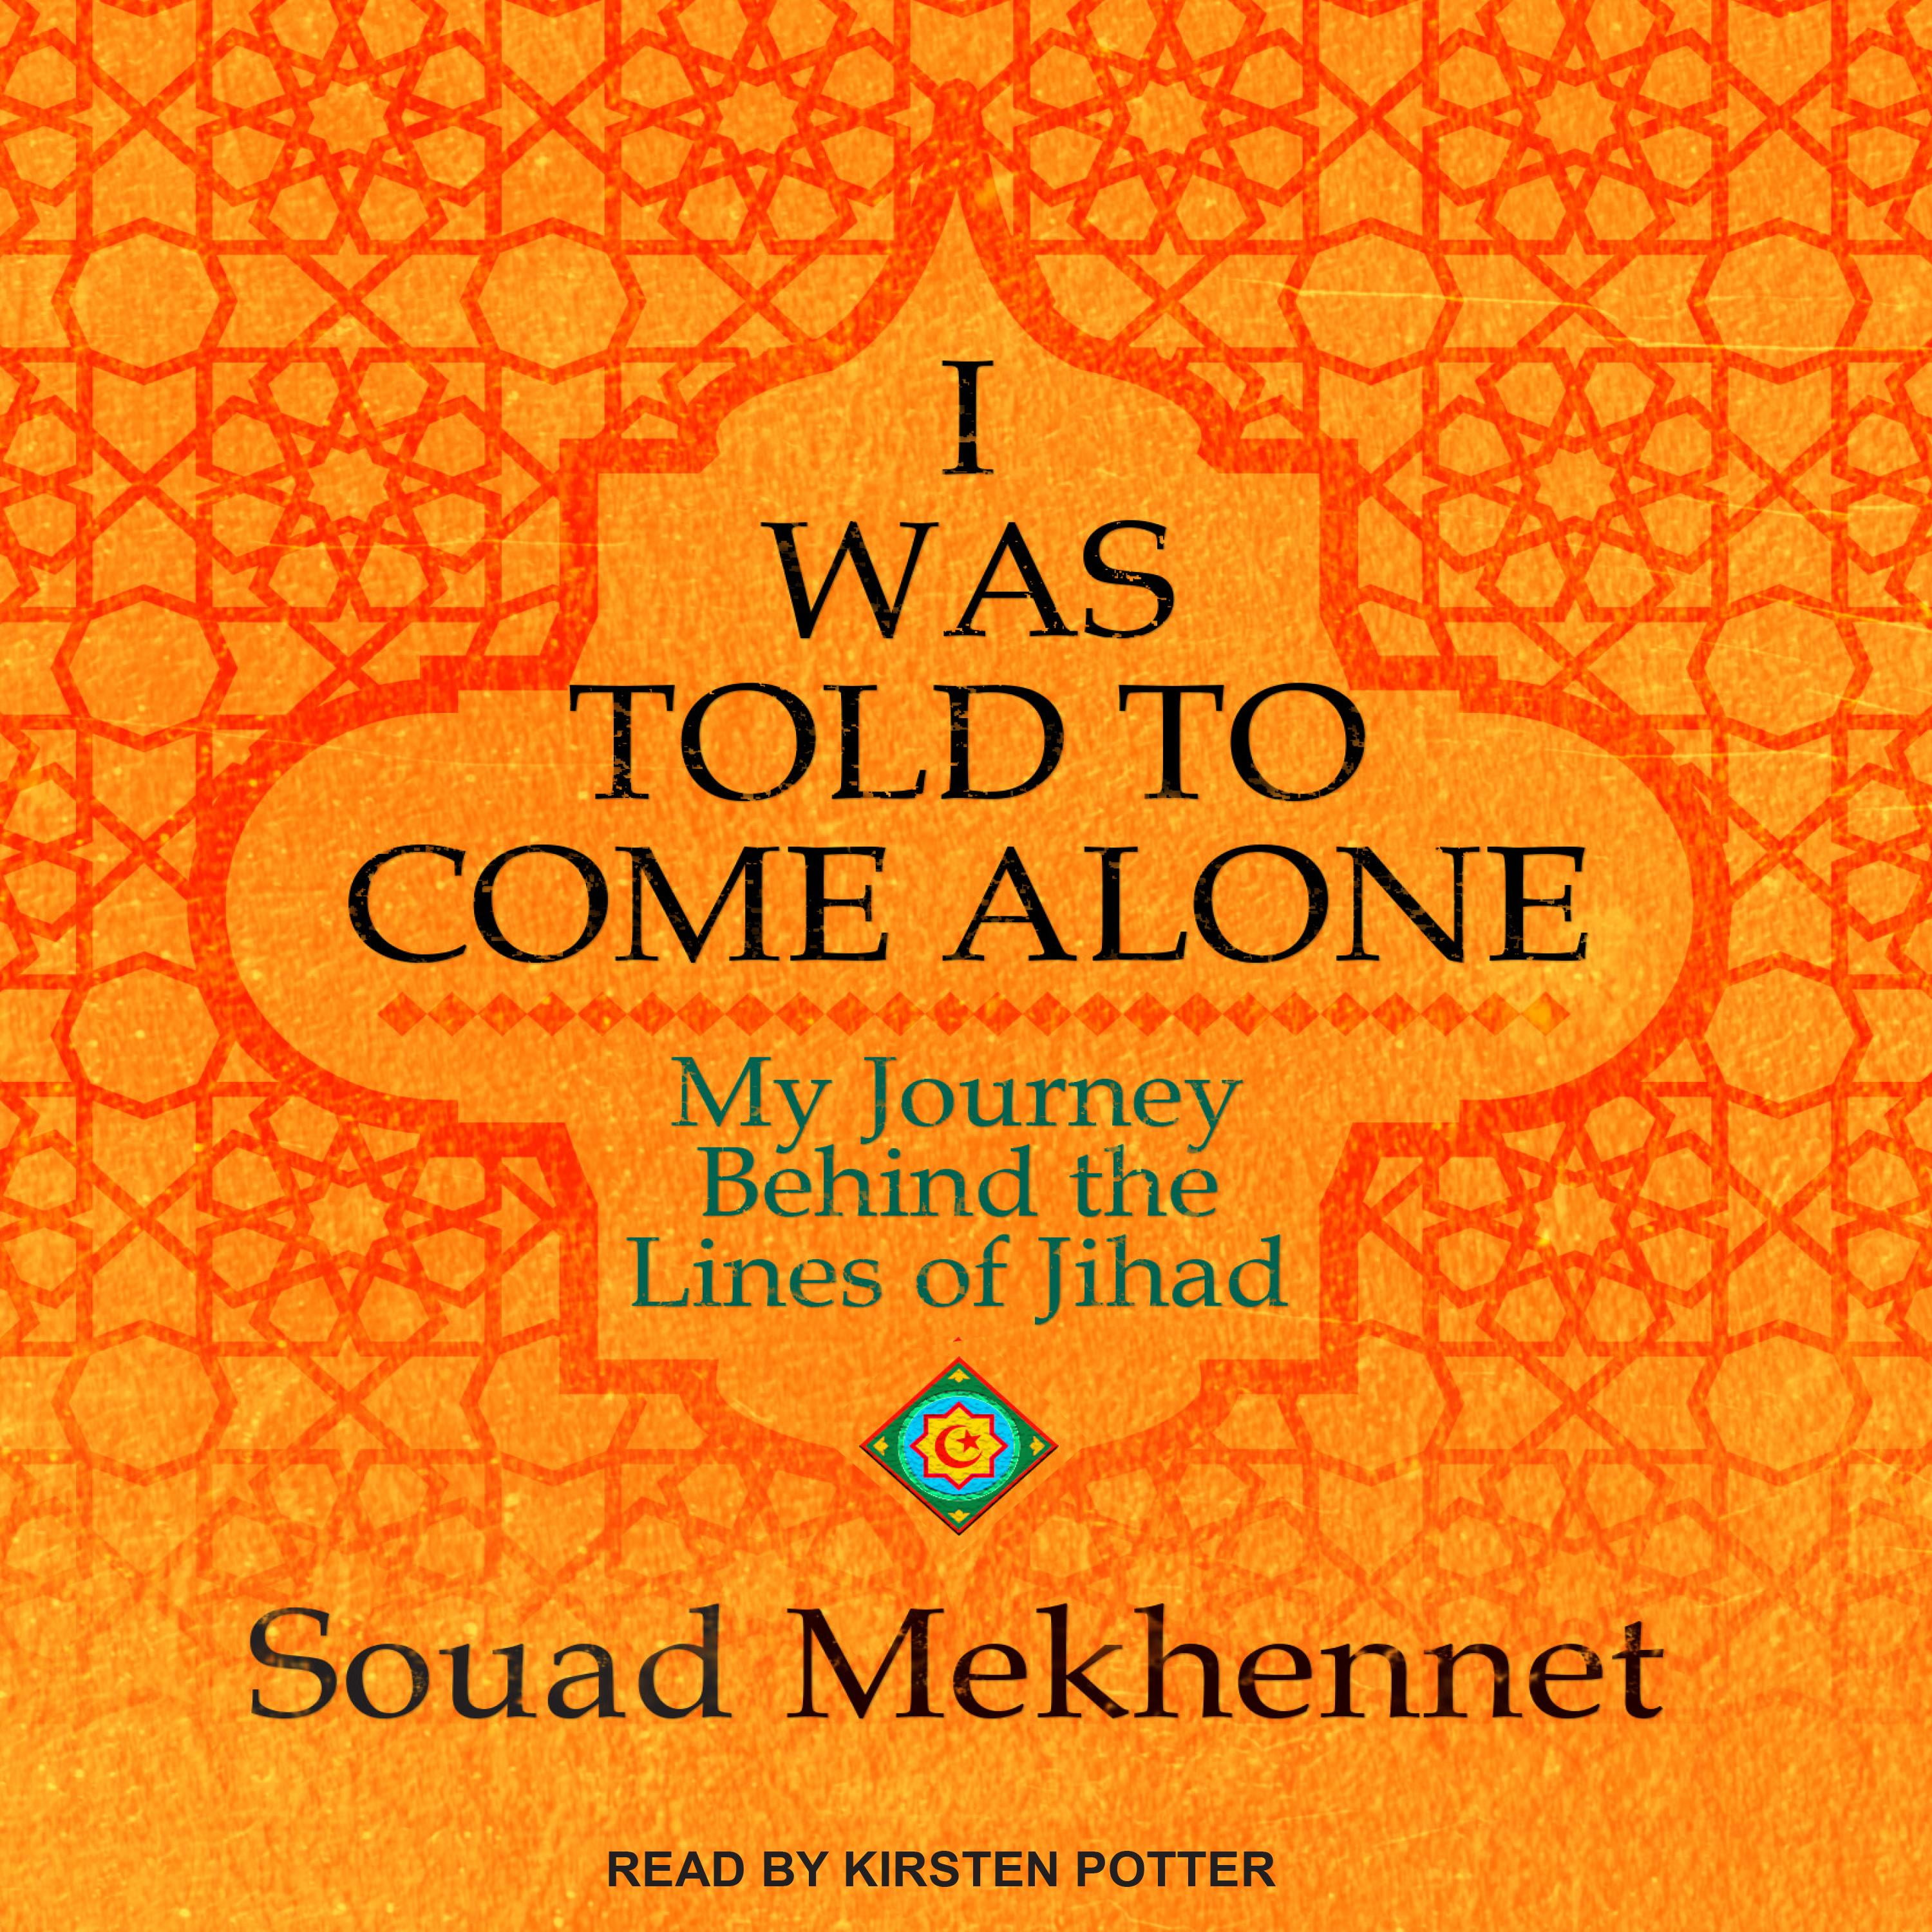 I Was Told to Come Alone My Journey Behind the Lines of Jihad Epub-Ebook